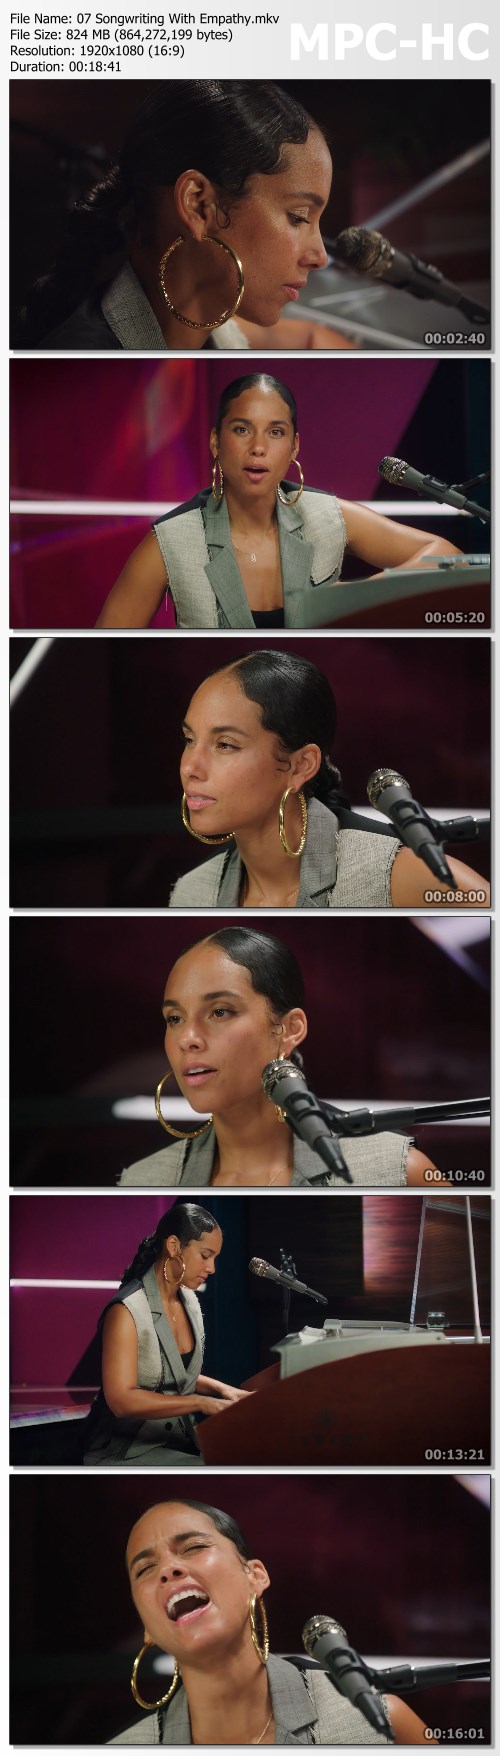 Alicia Keys Teaches Songwriting and Producing - MasterClass